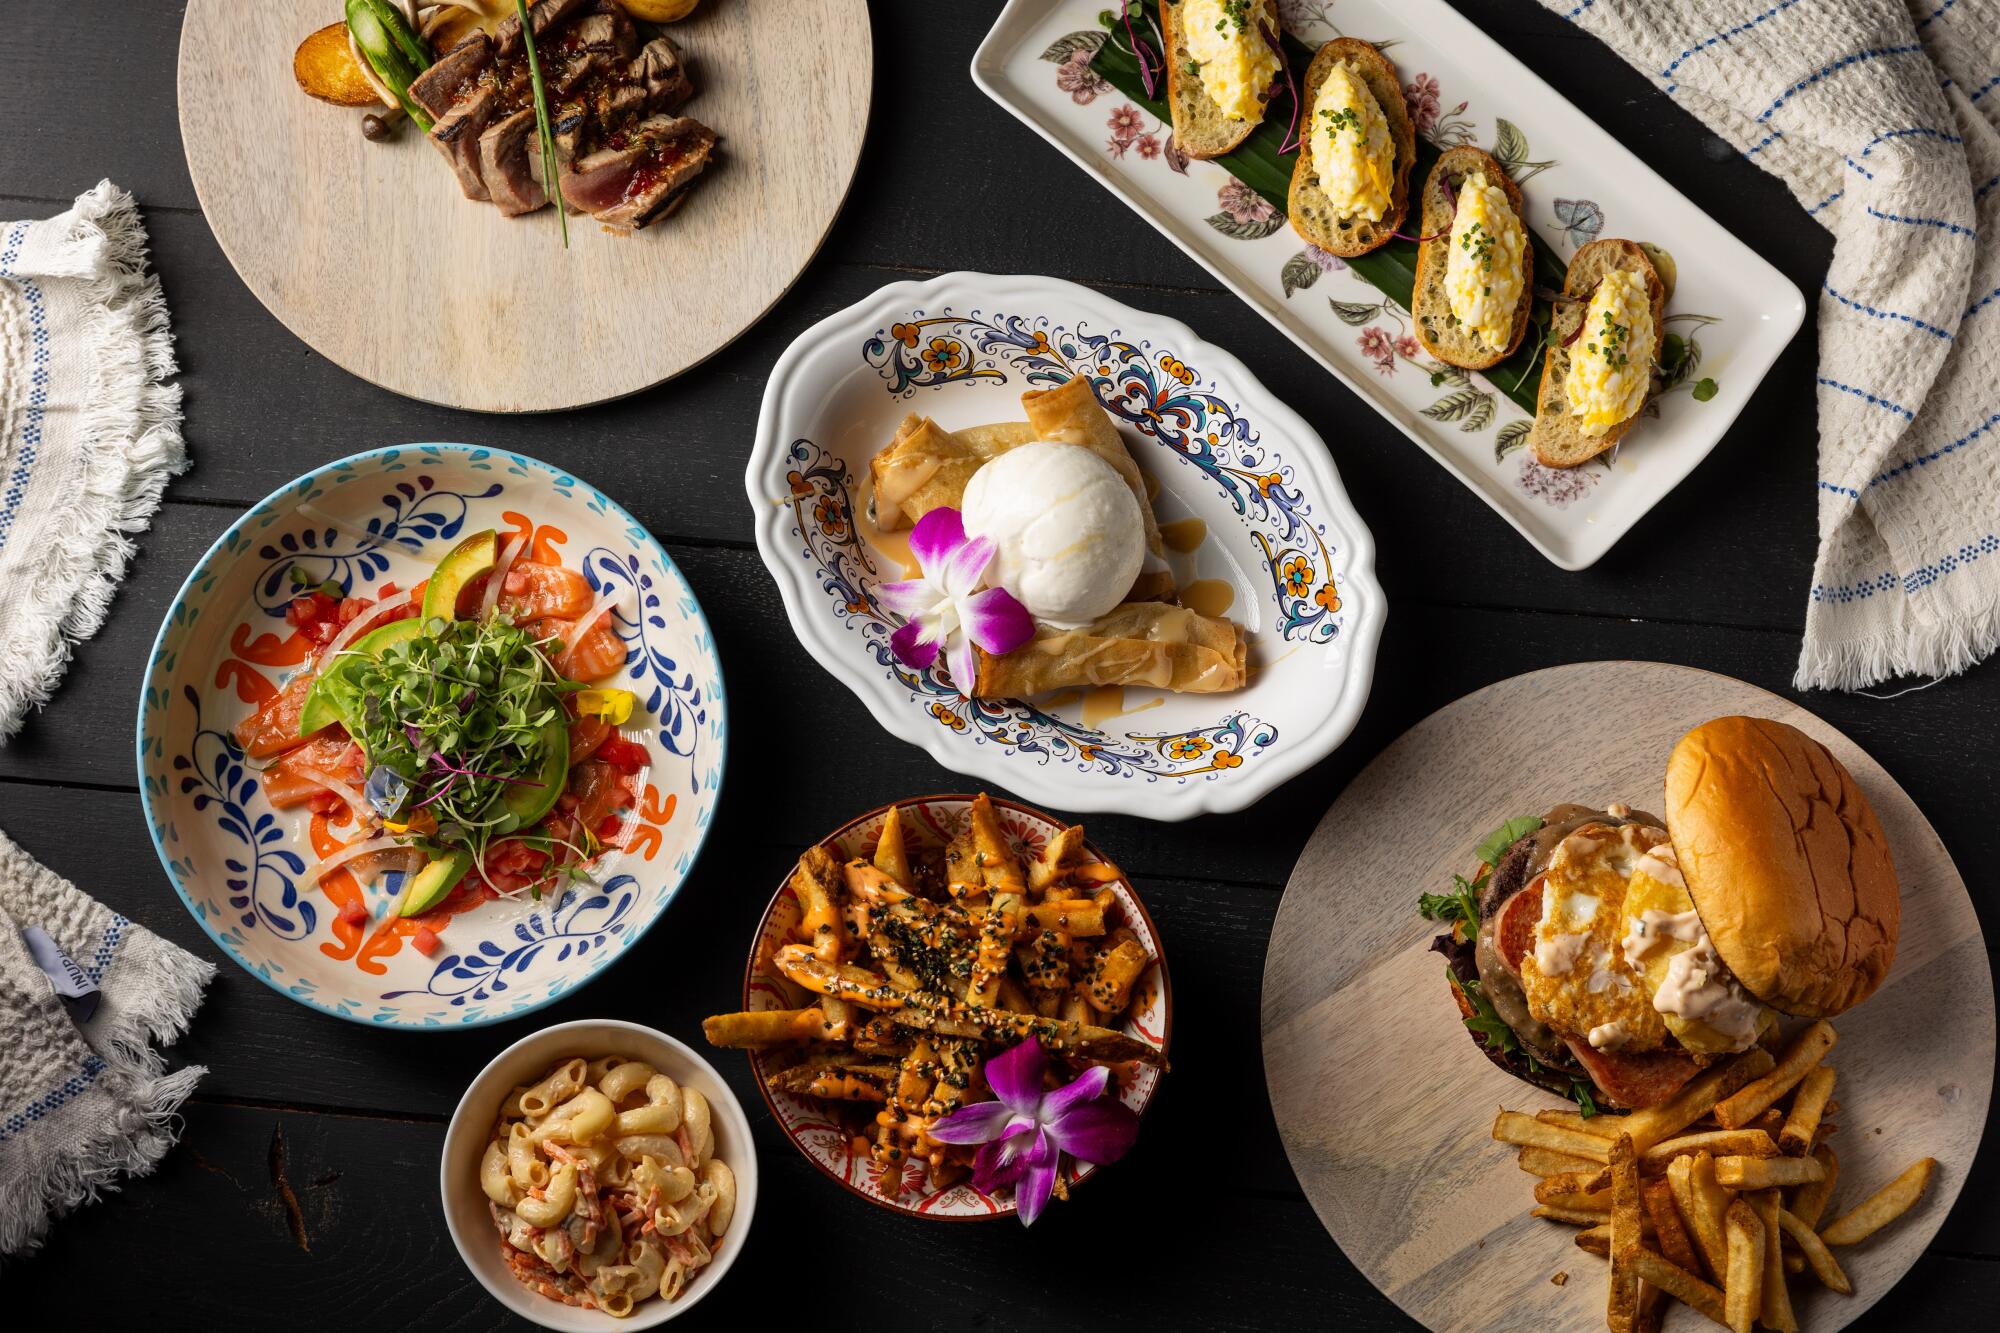 Asian fusion dishes from Strong Water Anaheim executive chef Steve Kling.